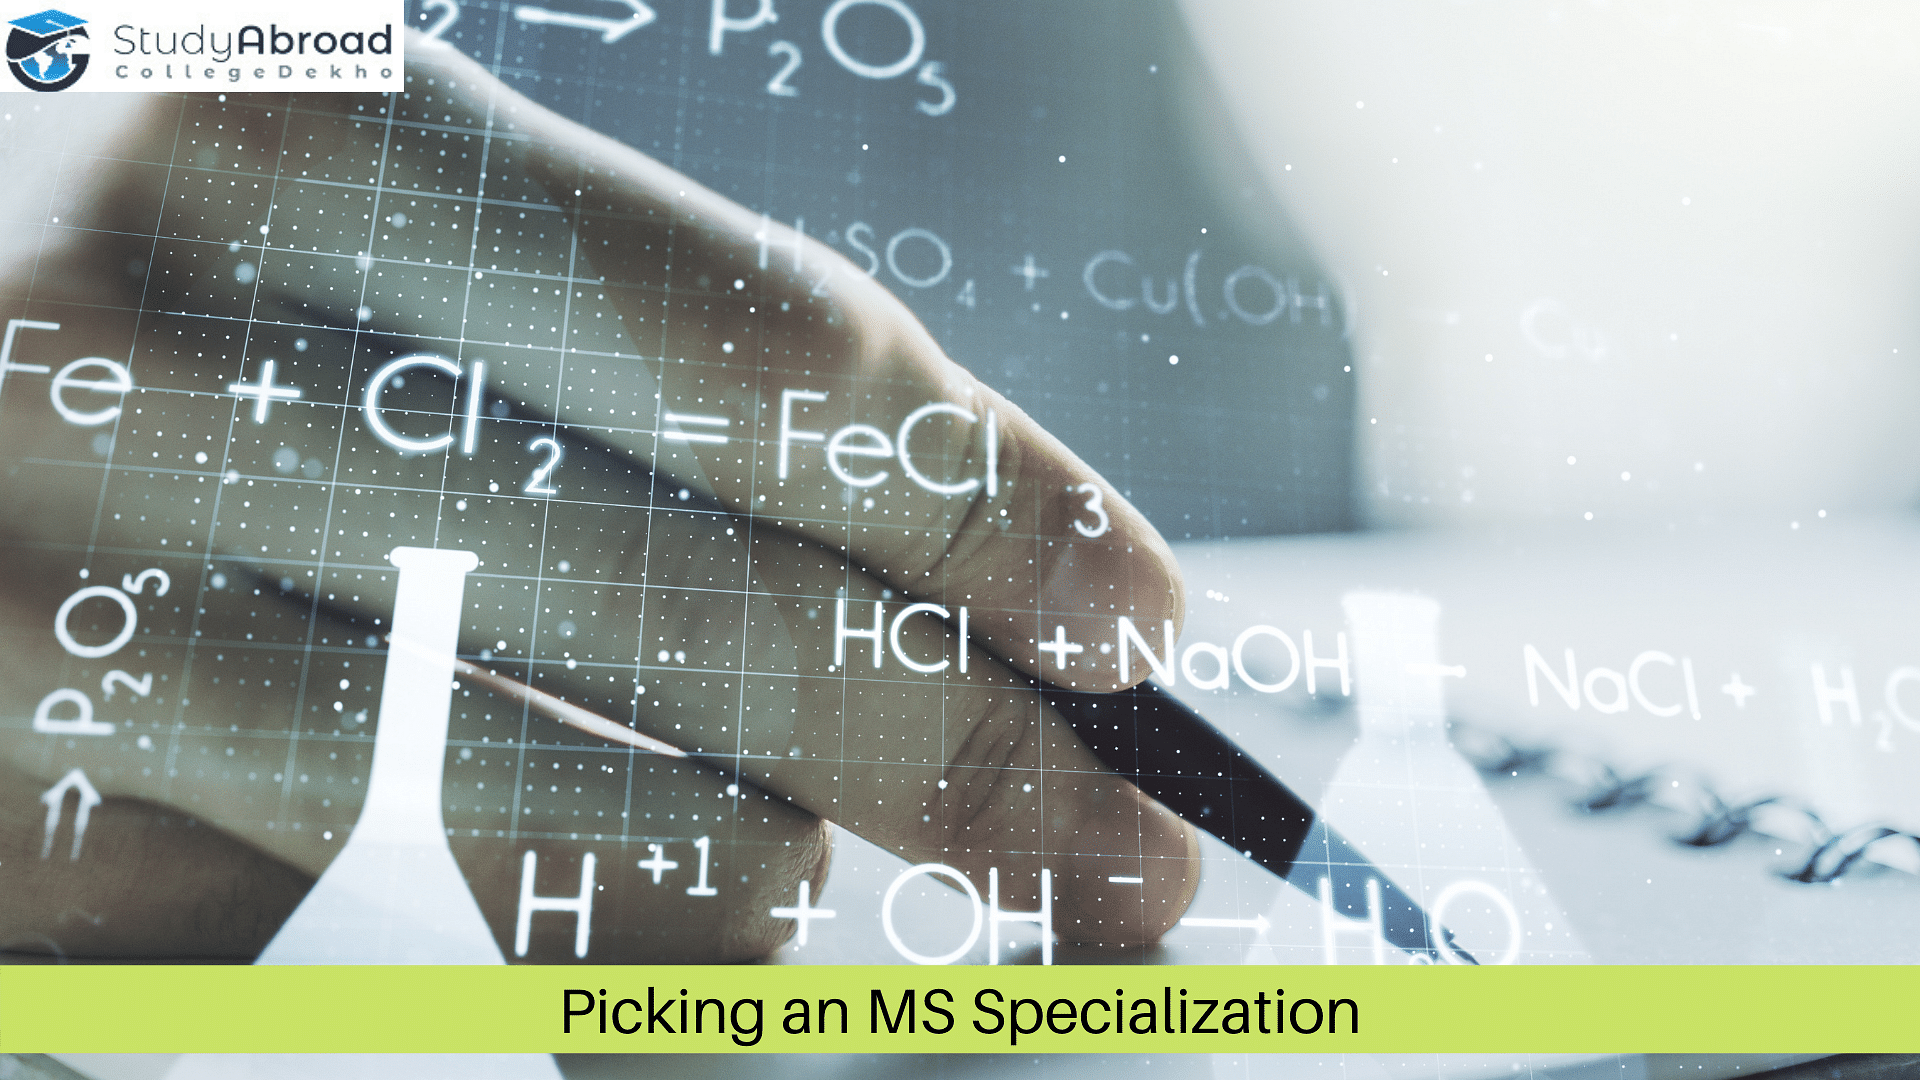 Picking an MS Specialization